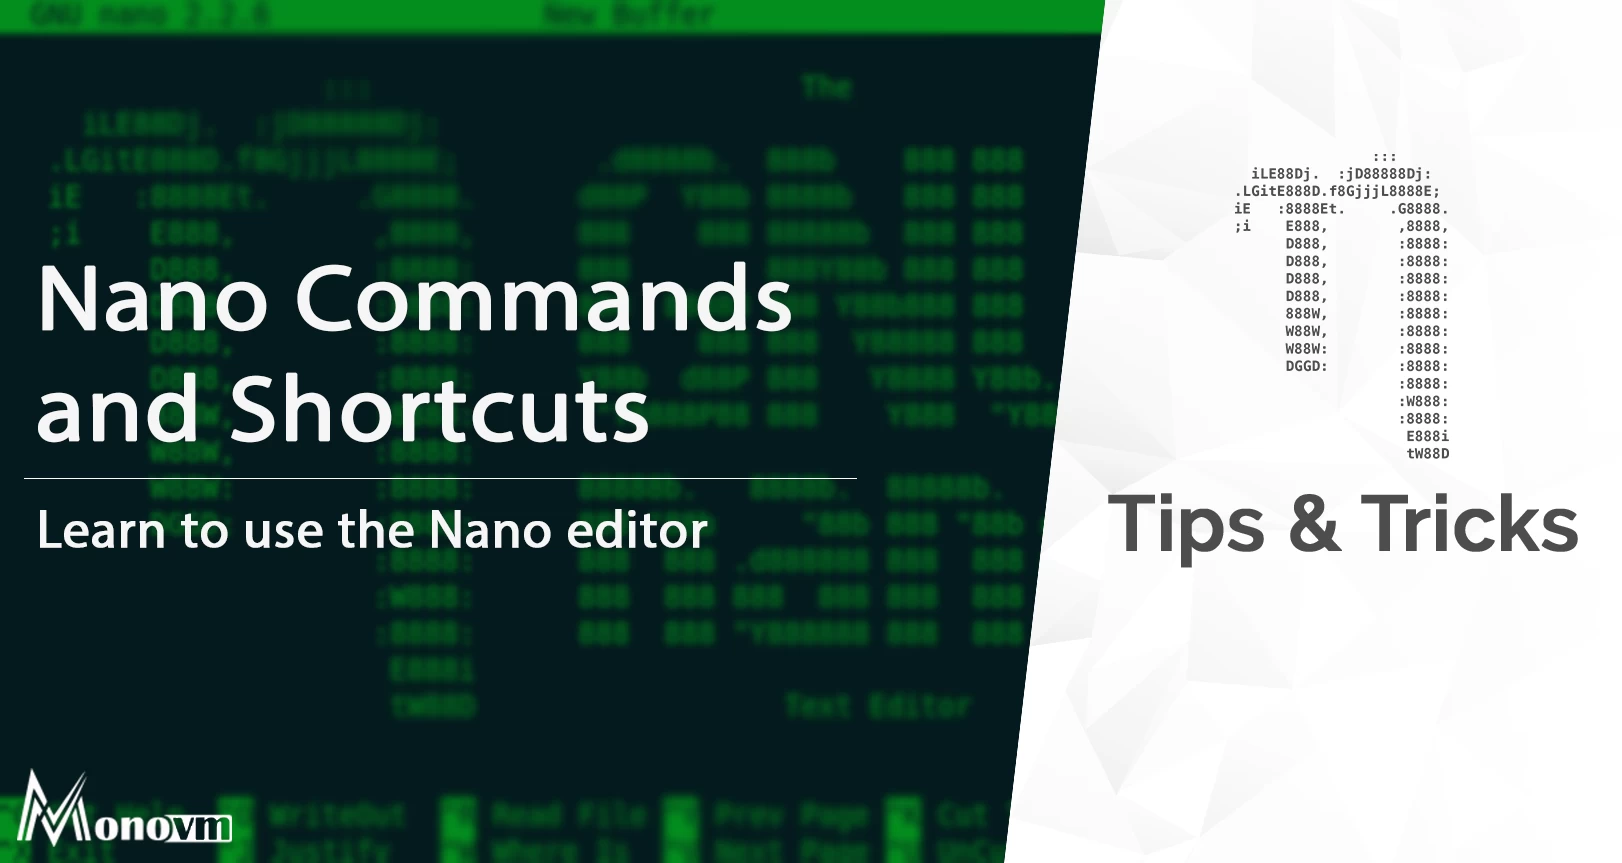 The Most Useful Nano Commands and Shortcuts